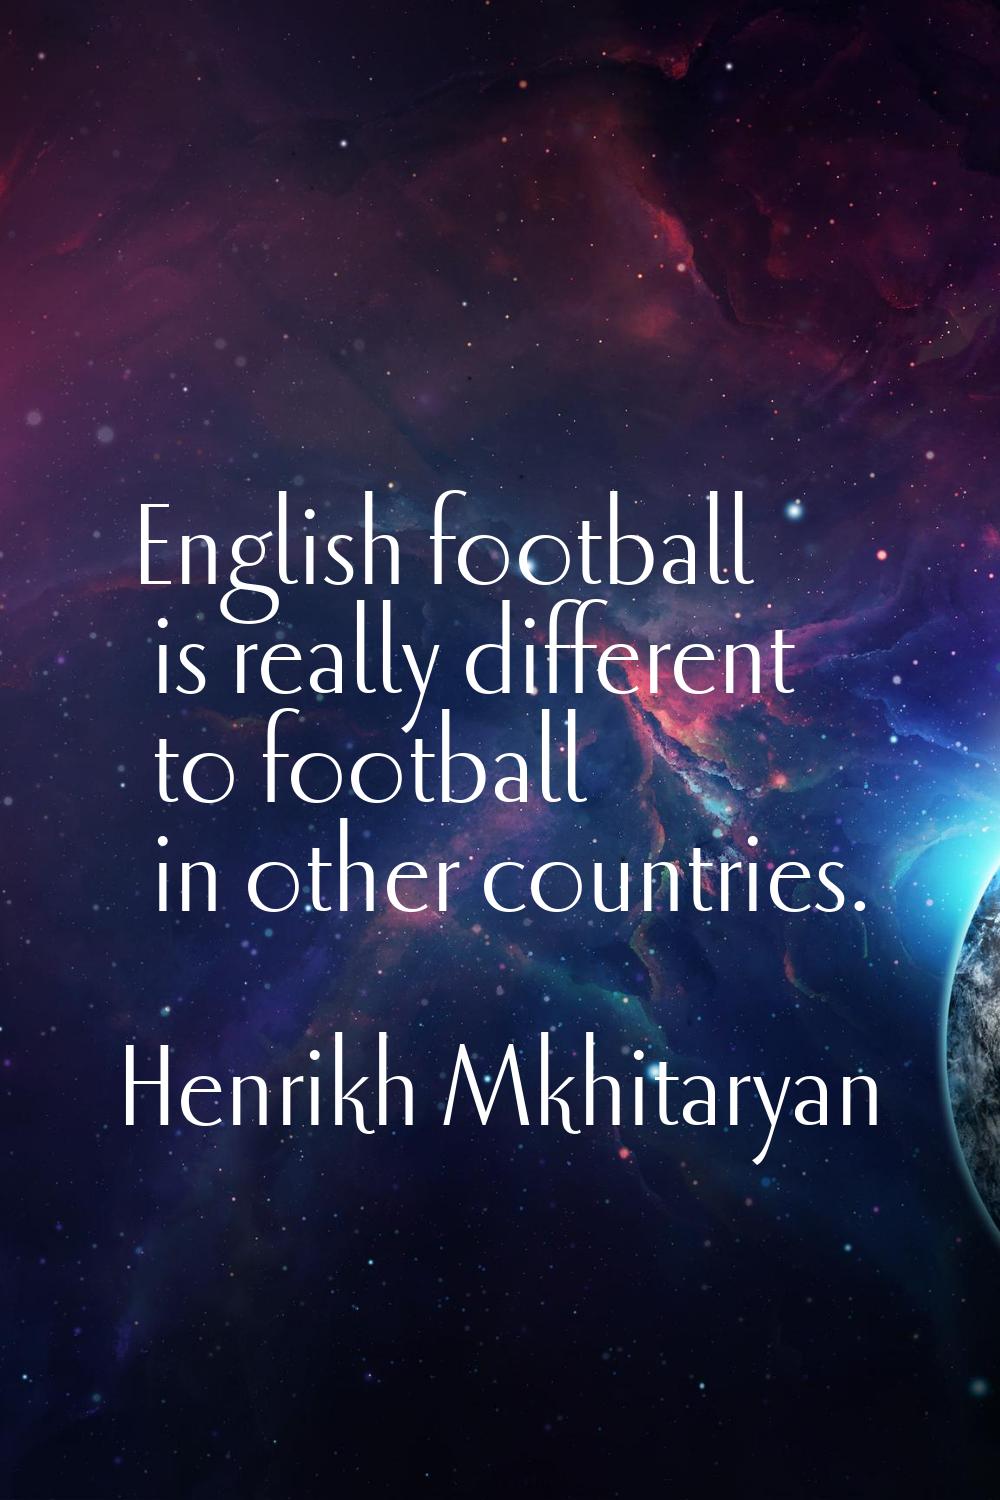 English football is really different to football in other countries.